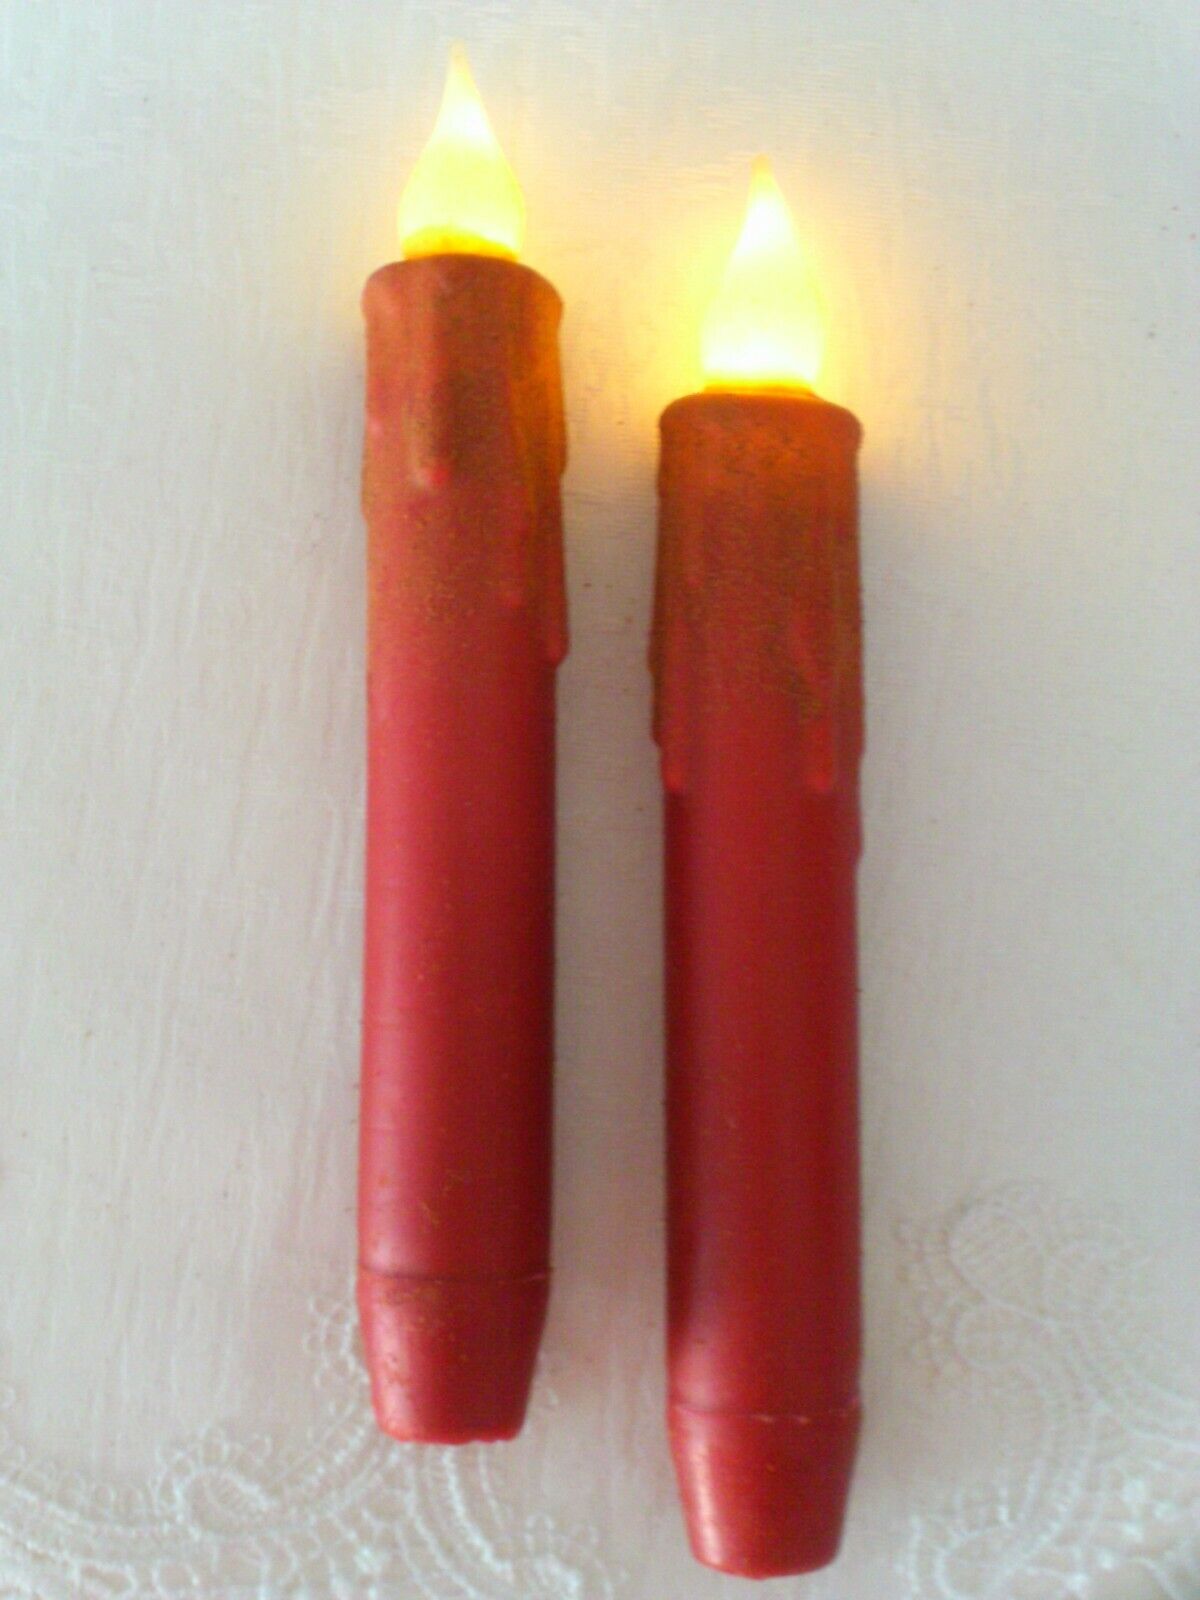 NEW RED TIMER TAPER CANDLES 6.75" Set of 2 Primitive Rustic Farm LED Christmas